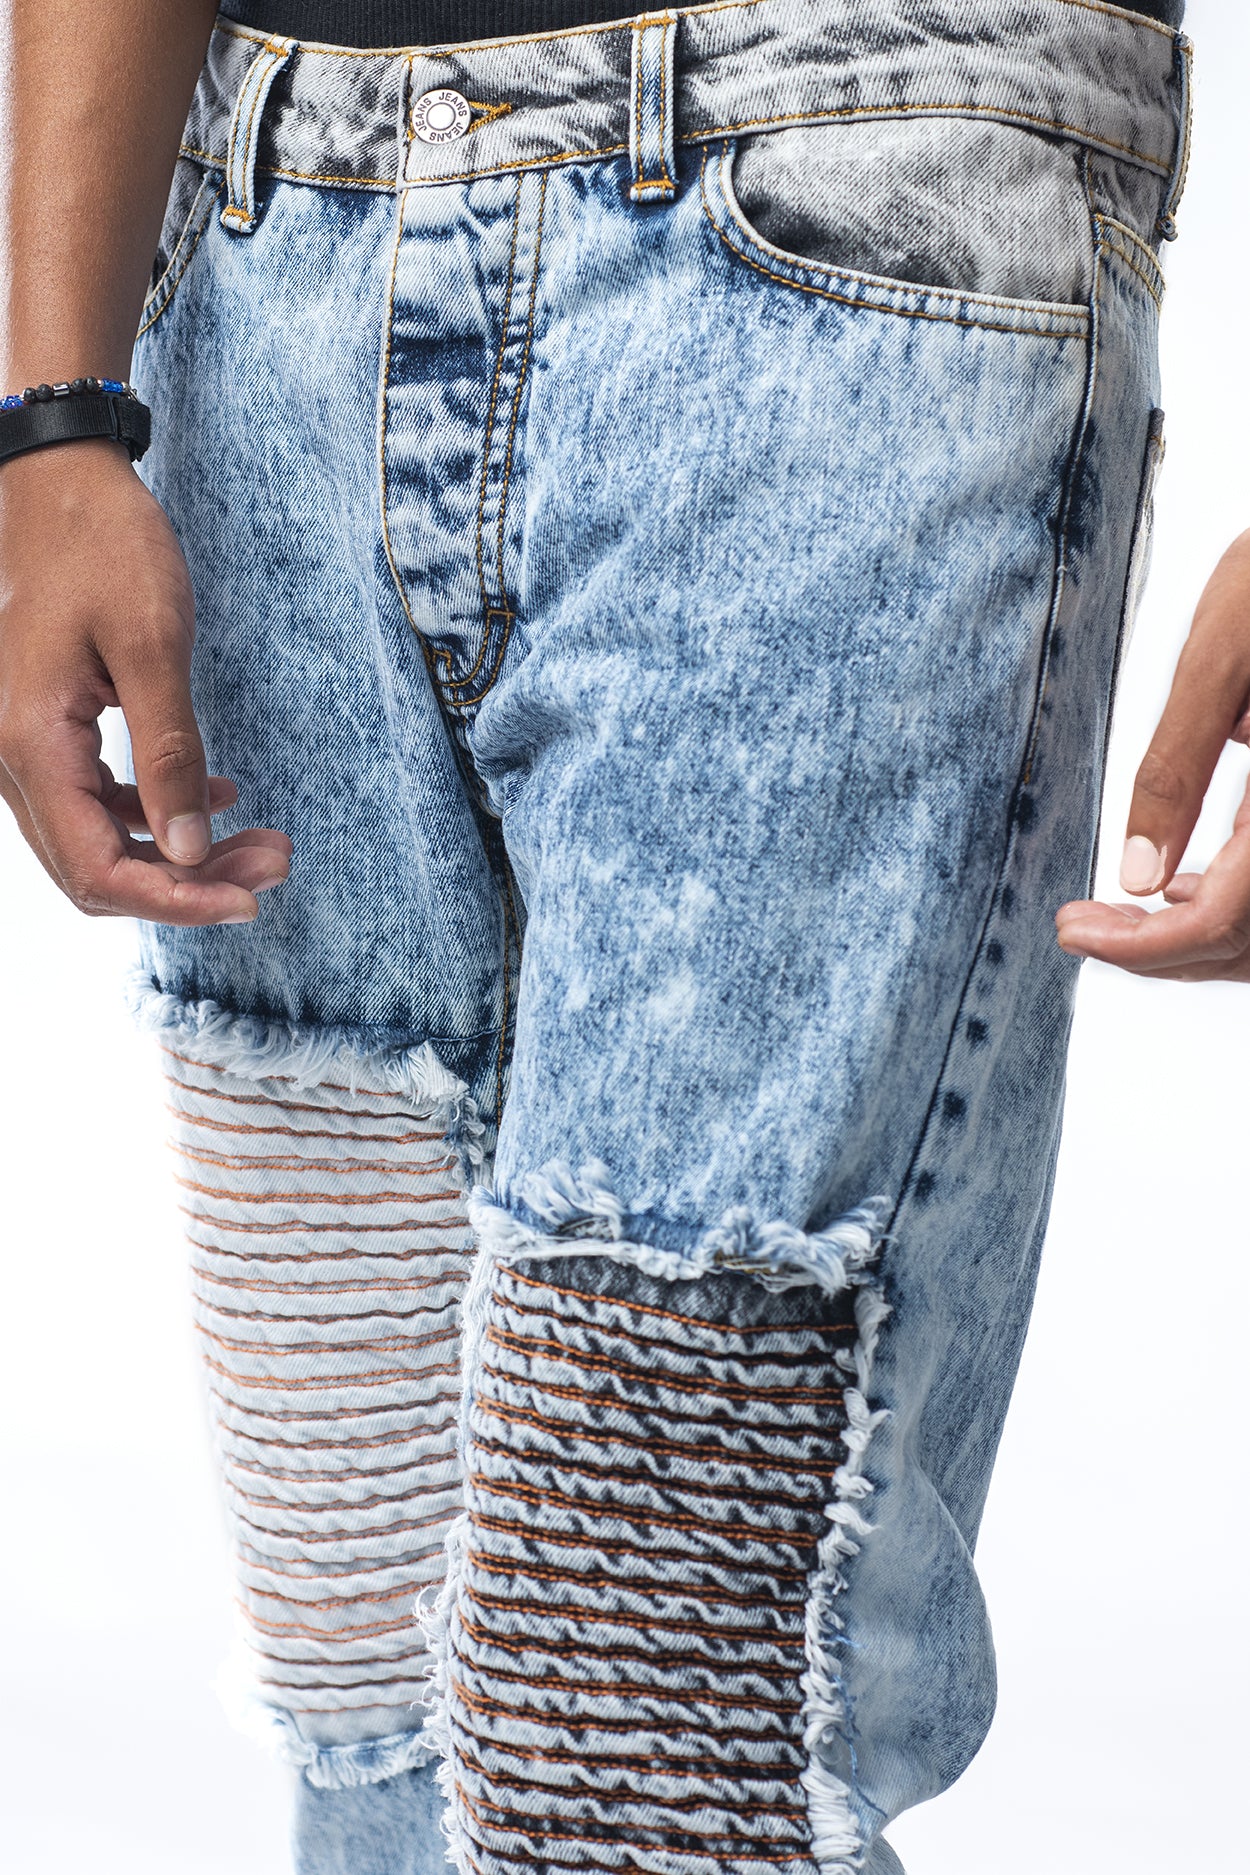 Light biker model jeans with Effemme stitched rips and tears